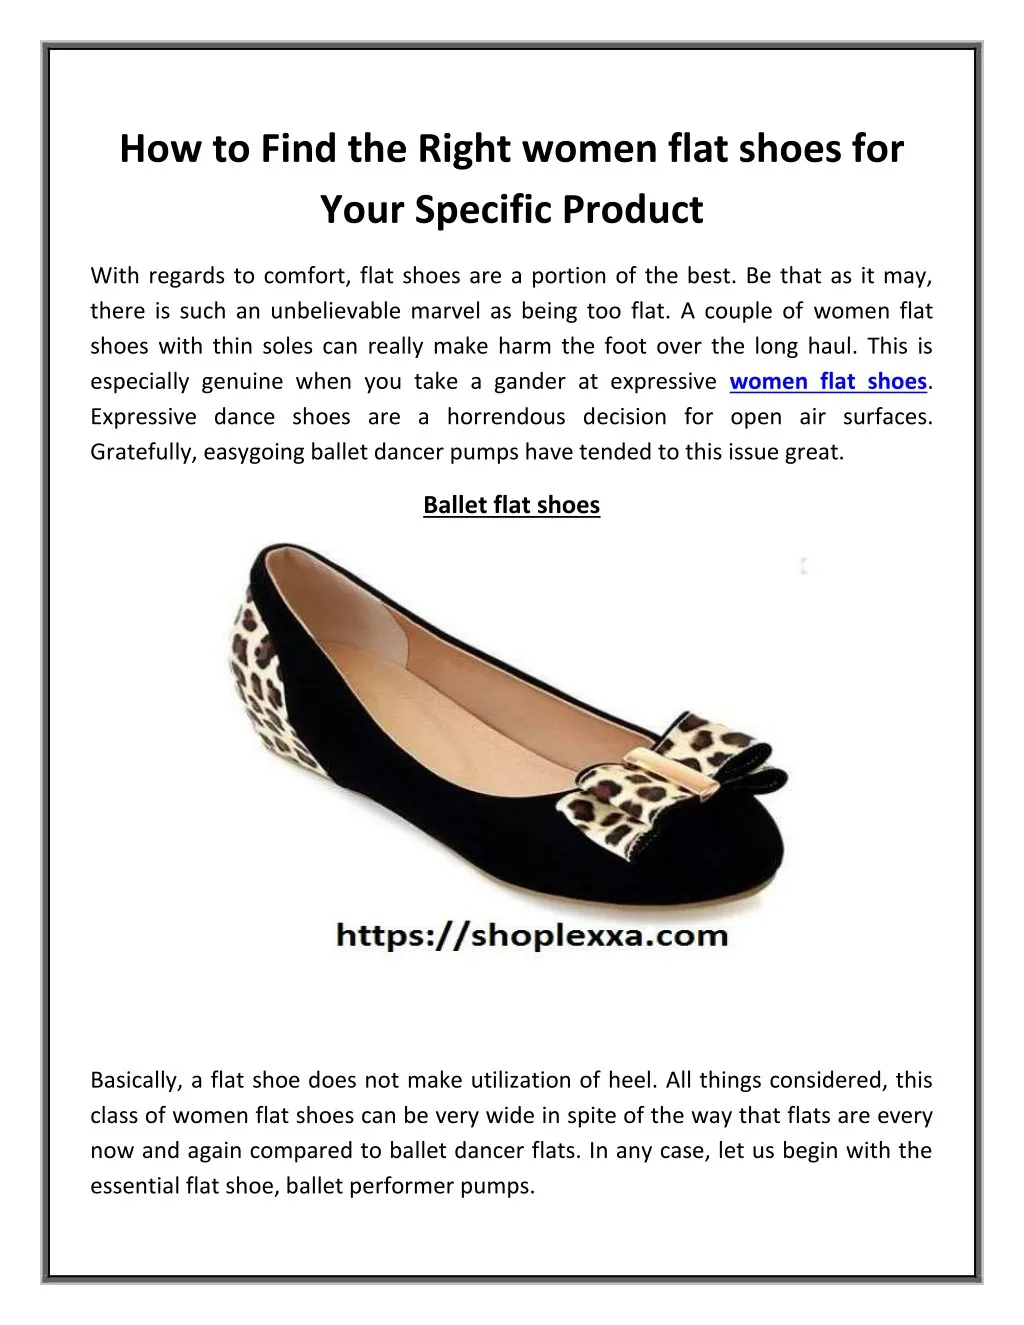 how to find the right women flat shoes for your